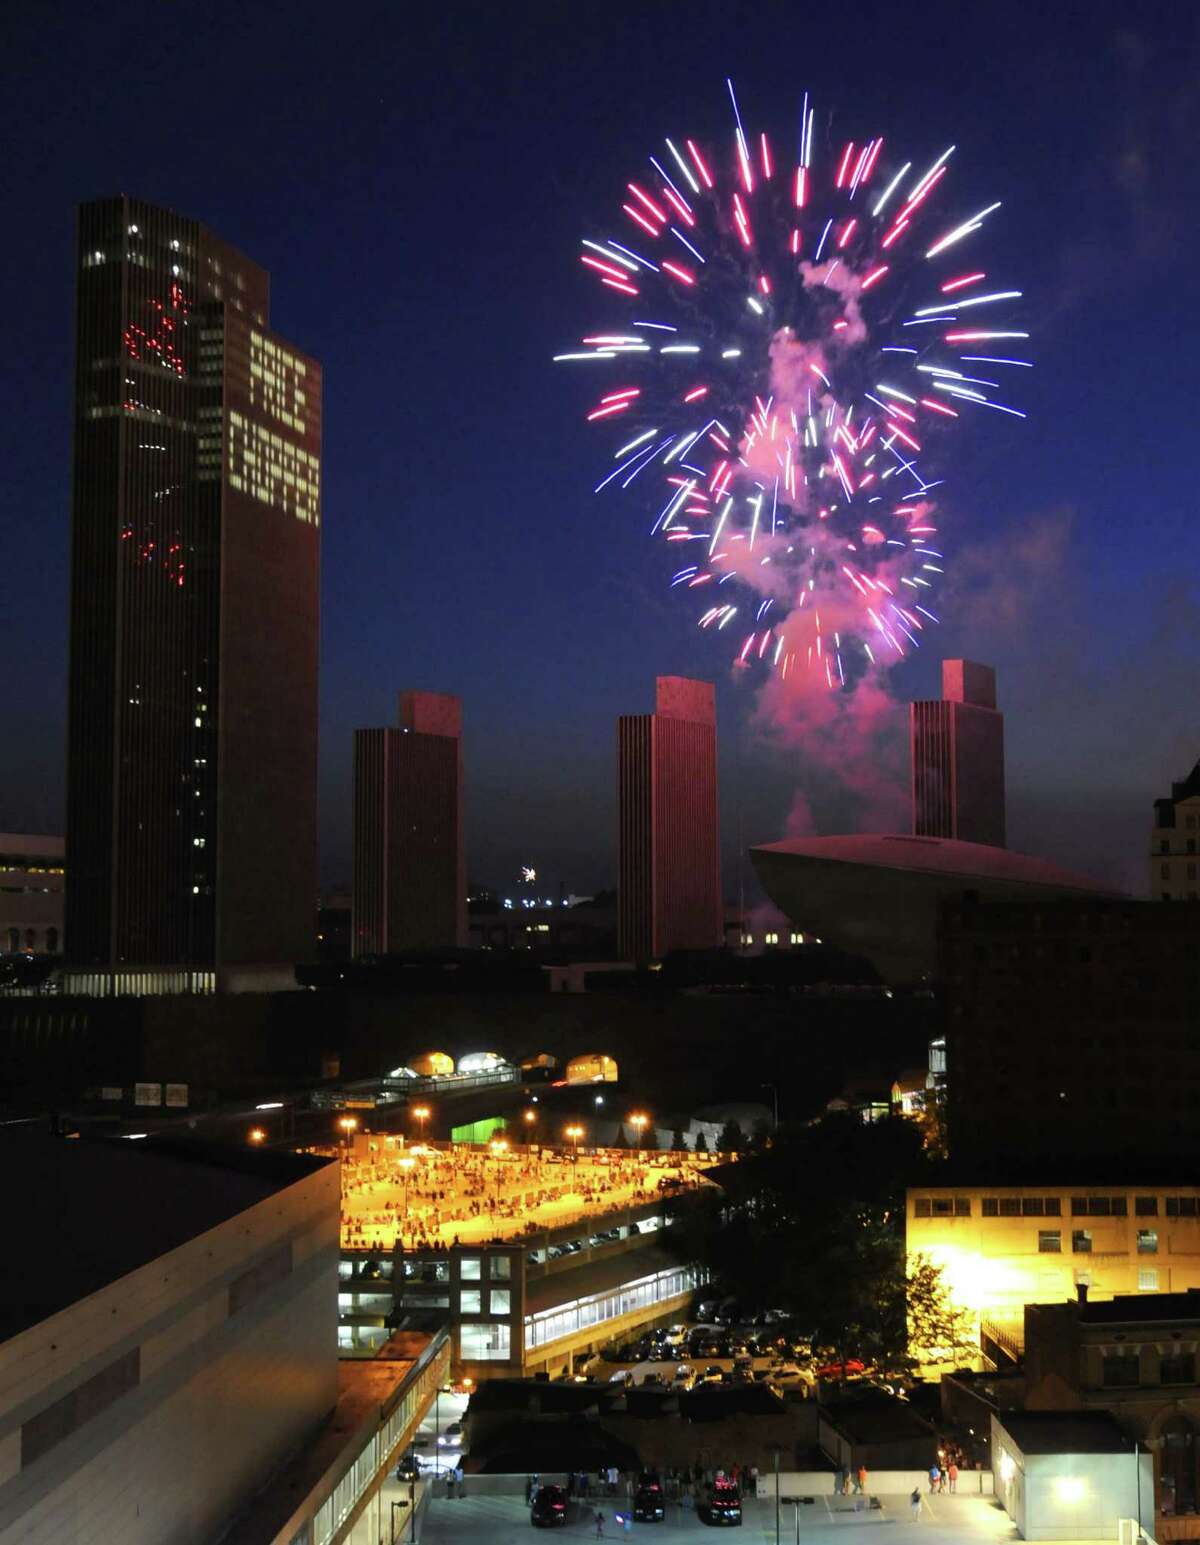 The bang the booms and the sight of fireworks fill the twilight sky during the Price Chopper 4th of July celebration at the Empire State Plaza in Albany N.Y.Wednesday July 4, 2012. (Michael P. Farrell/Times Union)